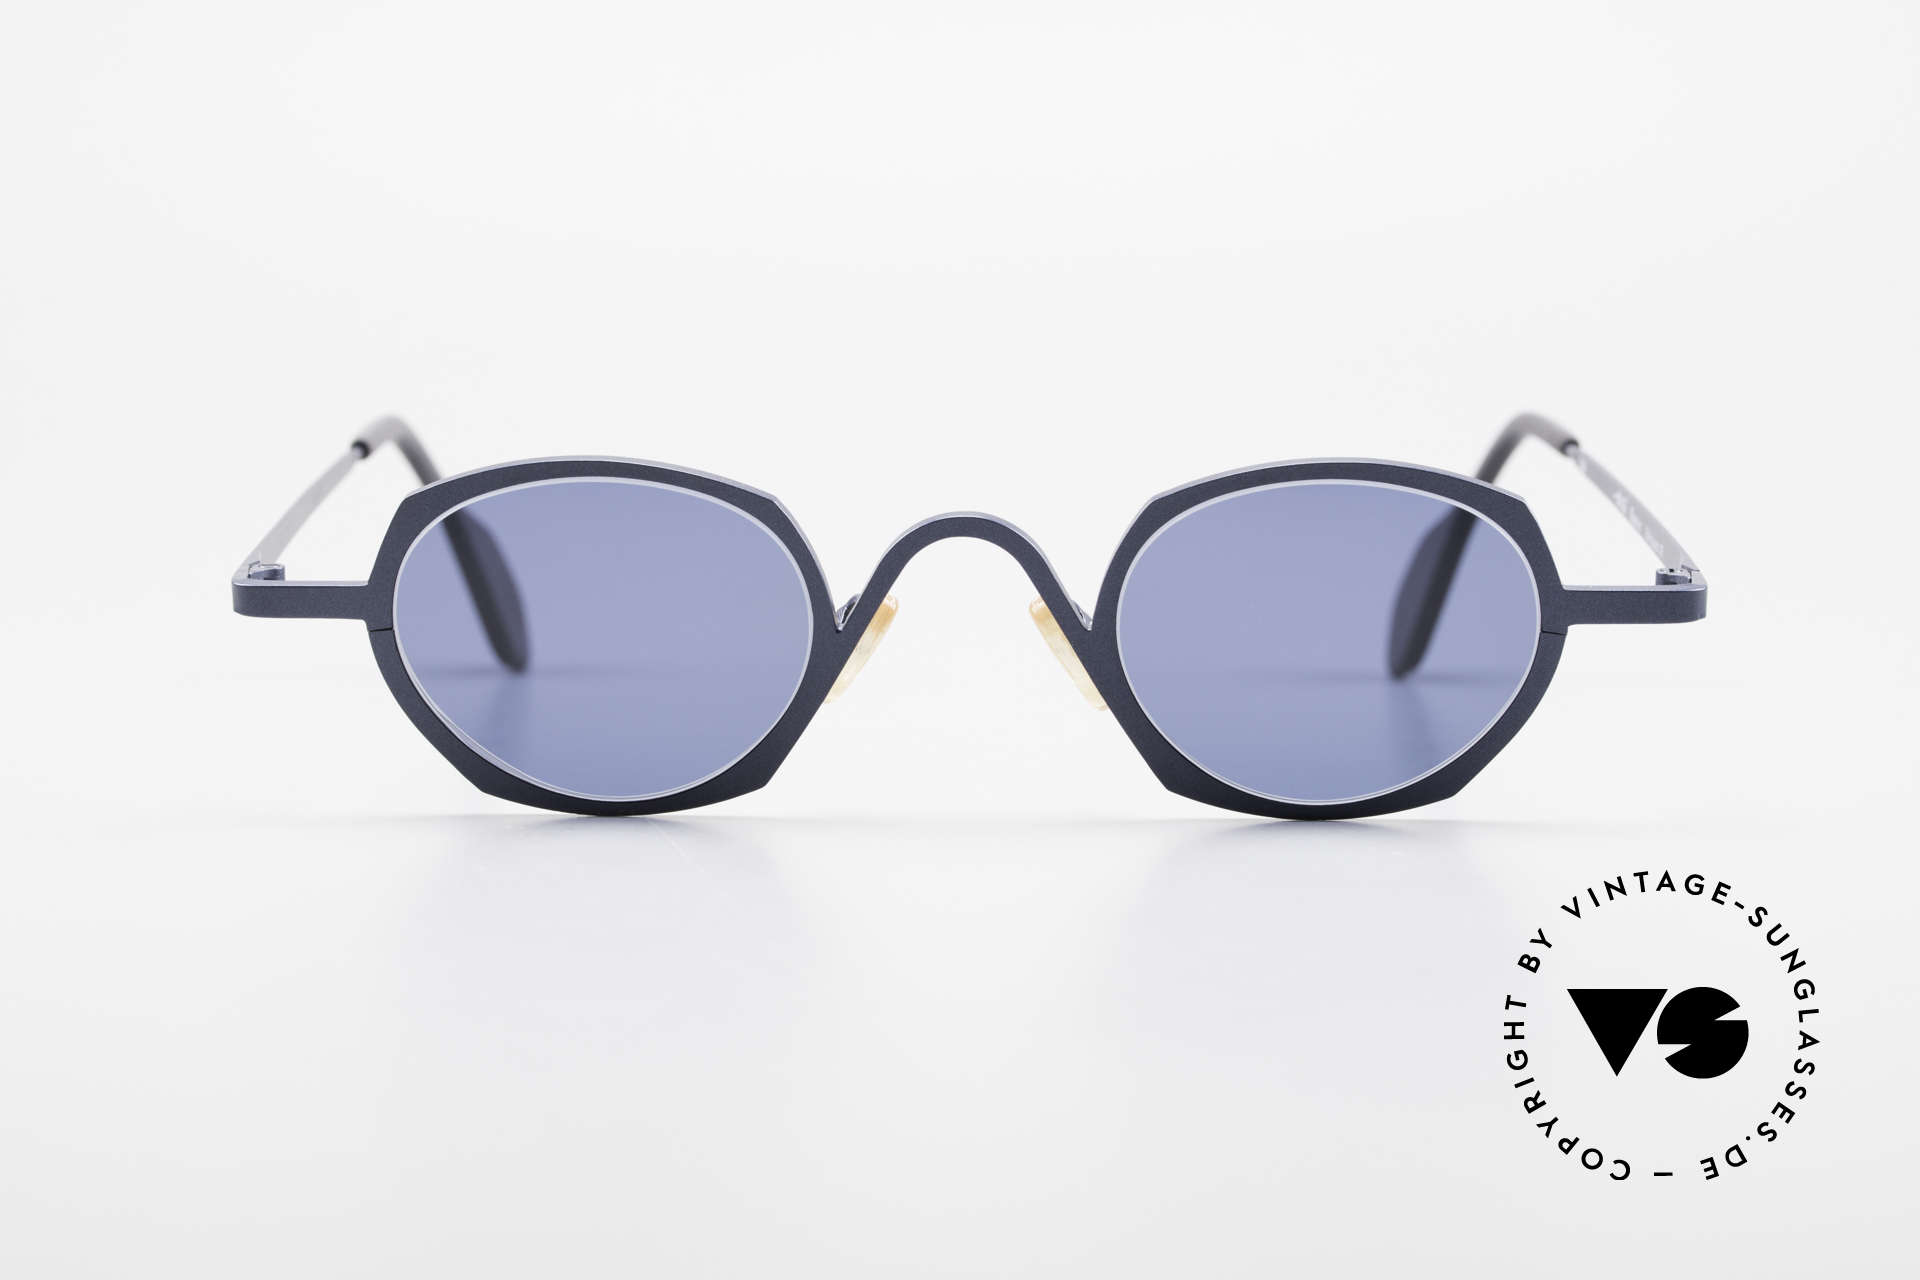 Theo Belgium Flower Round 90s Designer Sunglasses, founded in 1989 as 'opposite pole' to the 'mainstream', Made for Men and Women